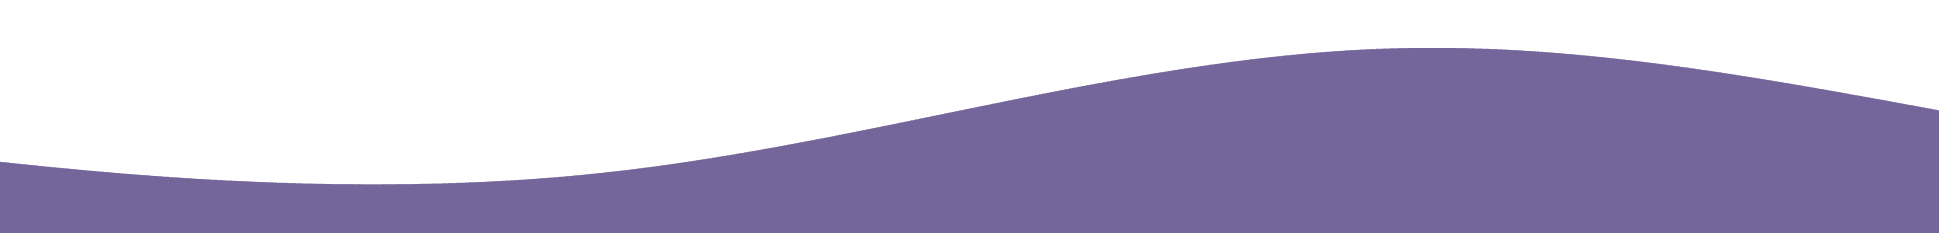 A green and purple background with some white lines